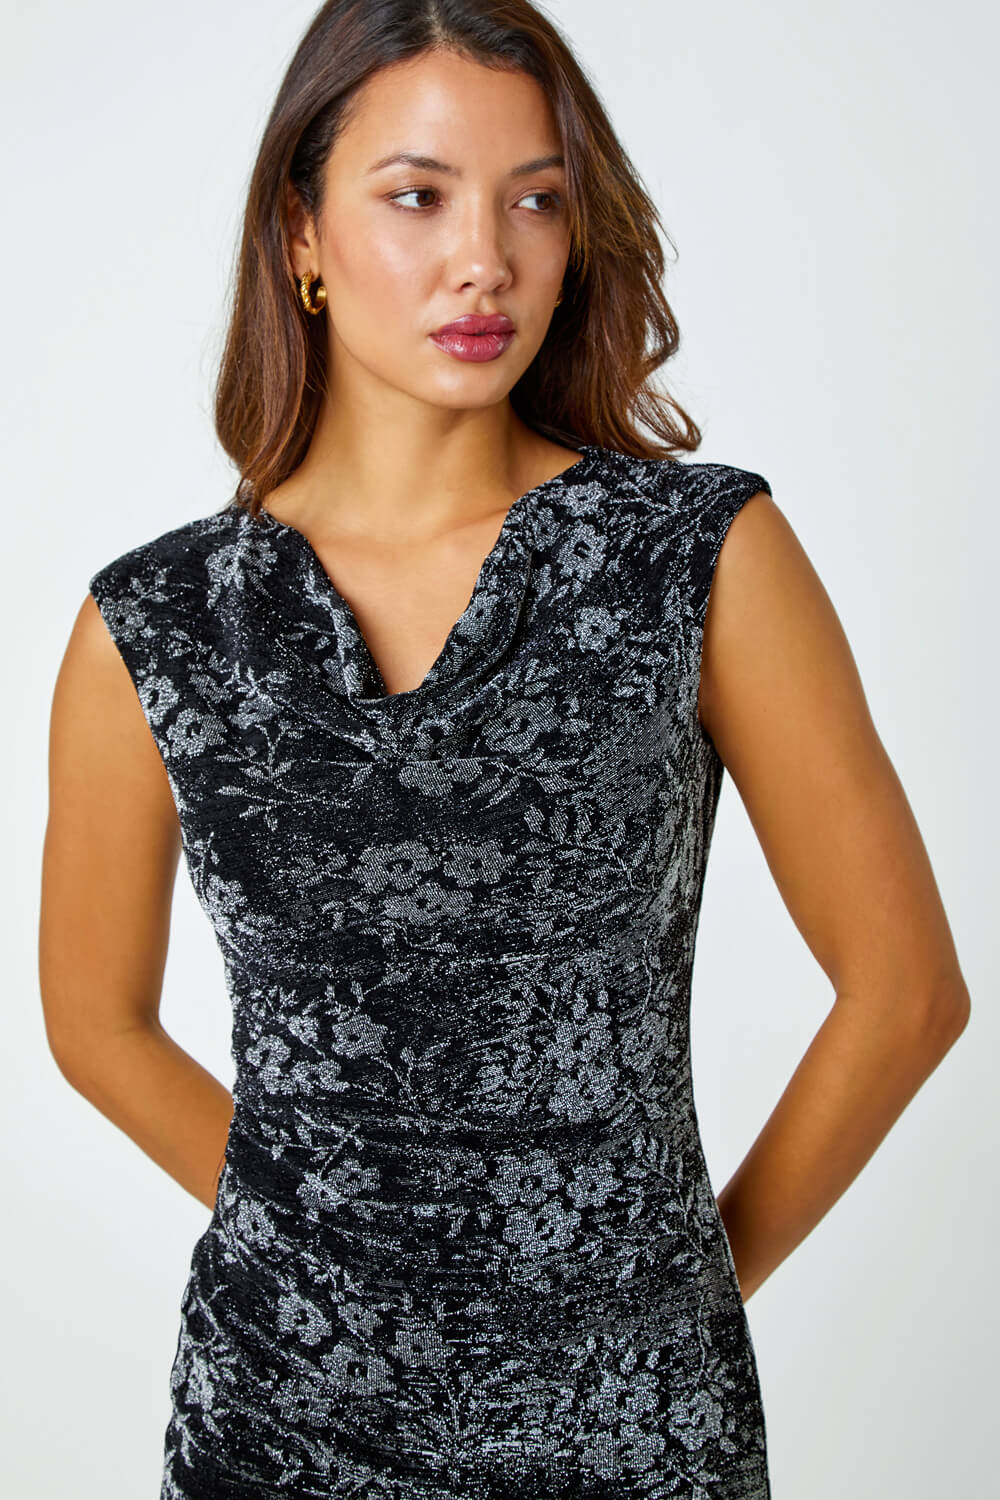 Silver Floral Print Cowl Neck Stretch Dress, Image 4 of 5